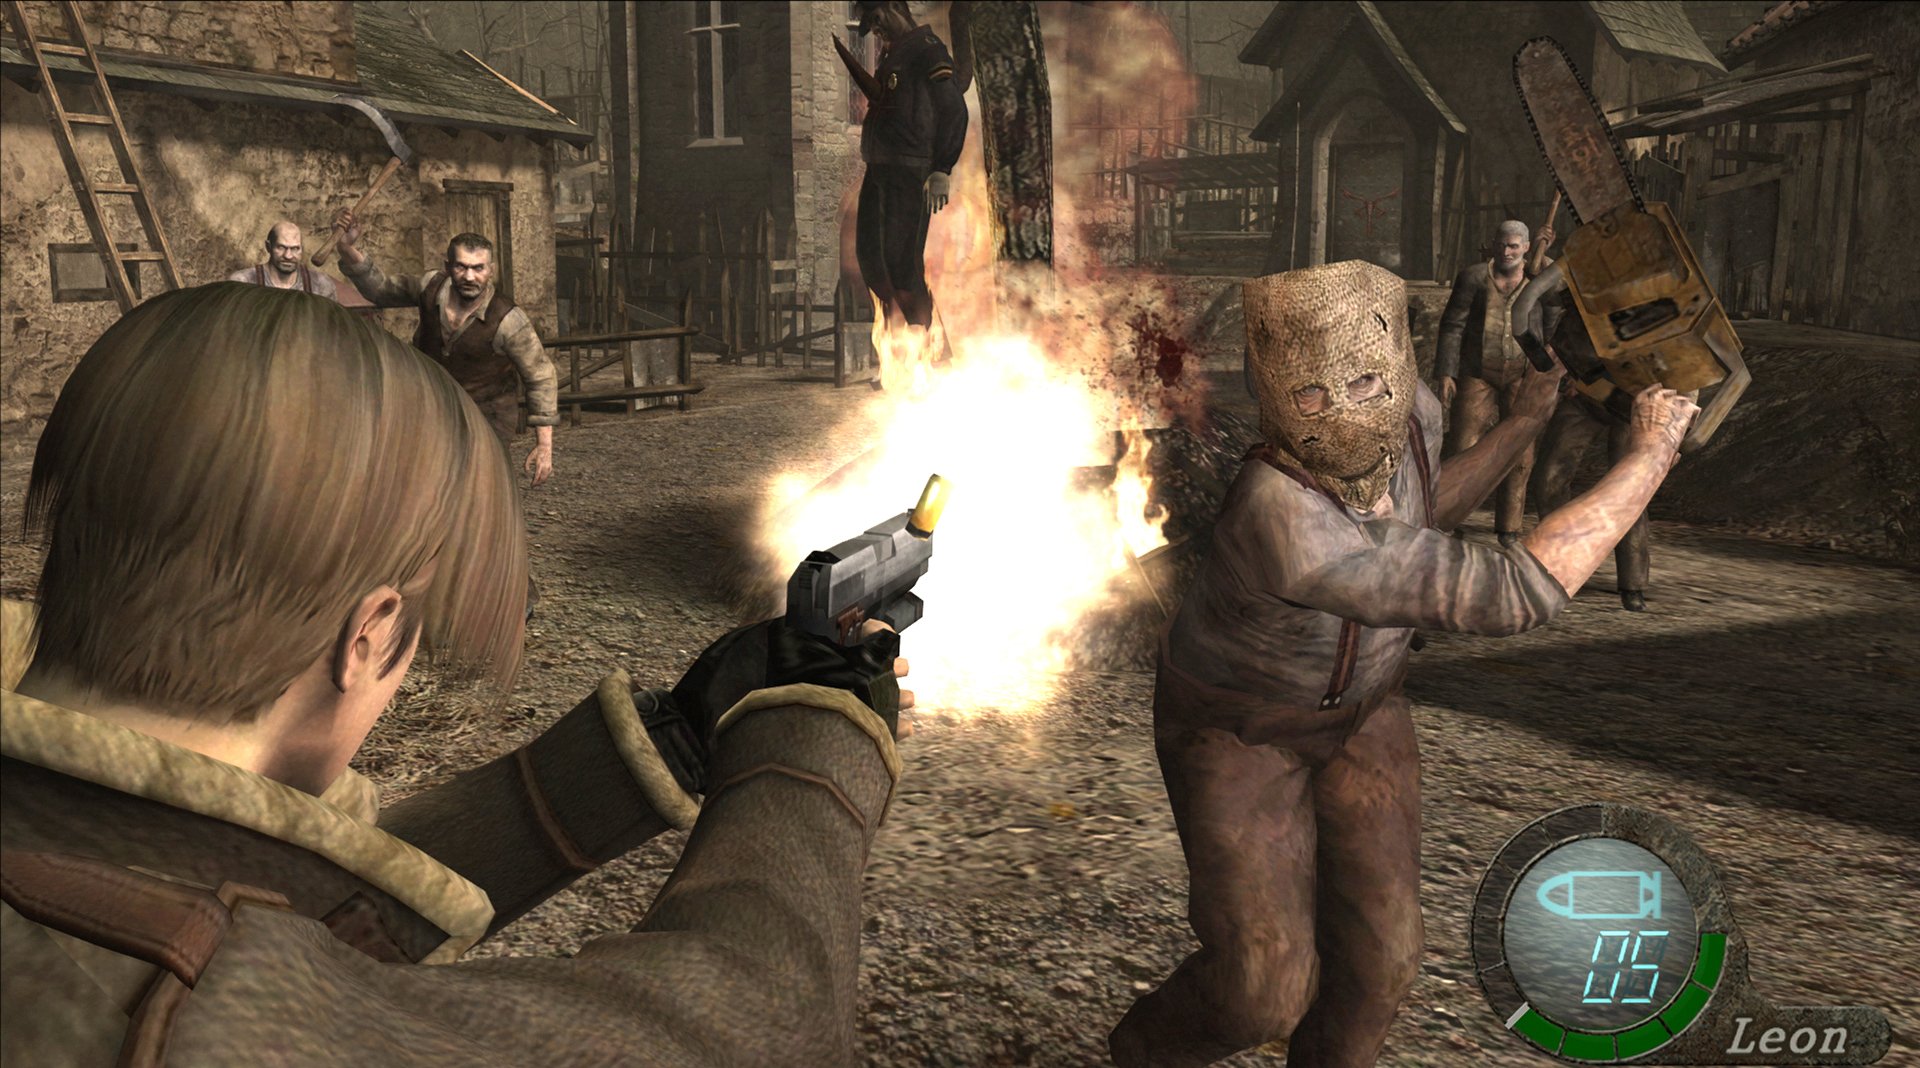 Some Details From the Unannounced Resident Evil 4 Remake